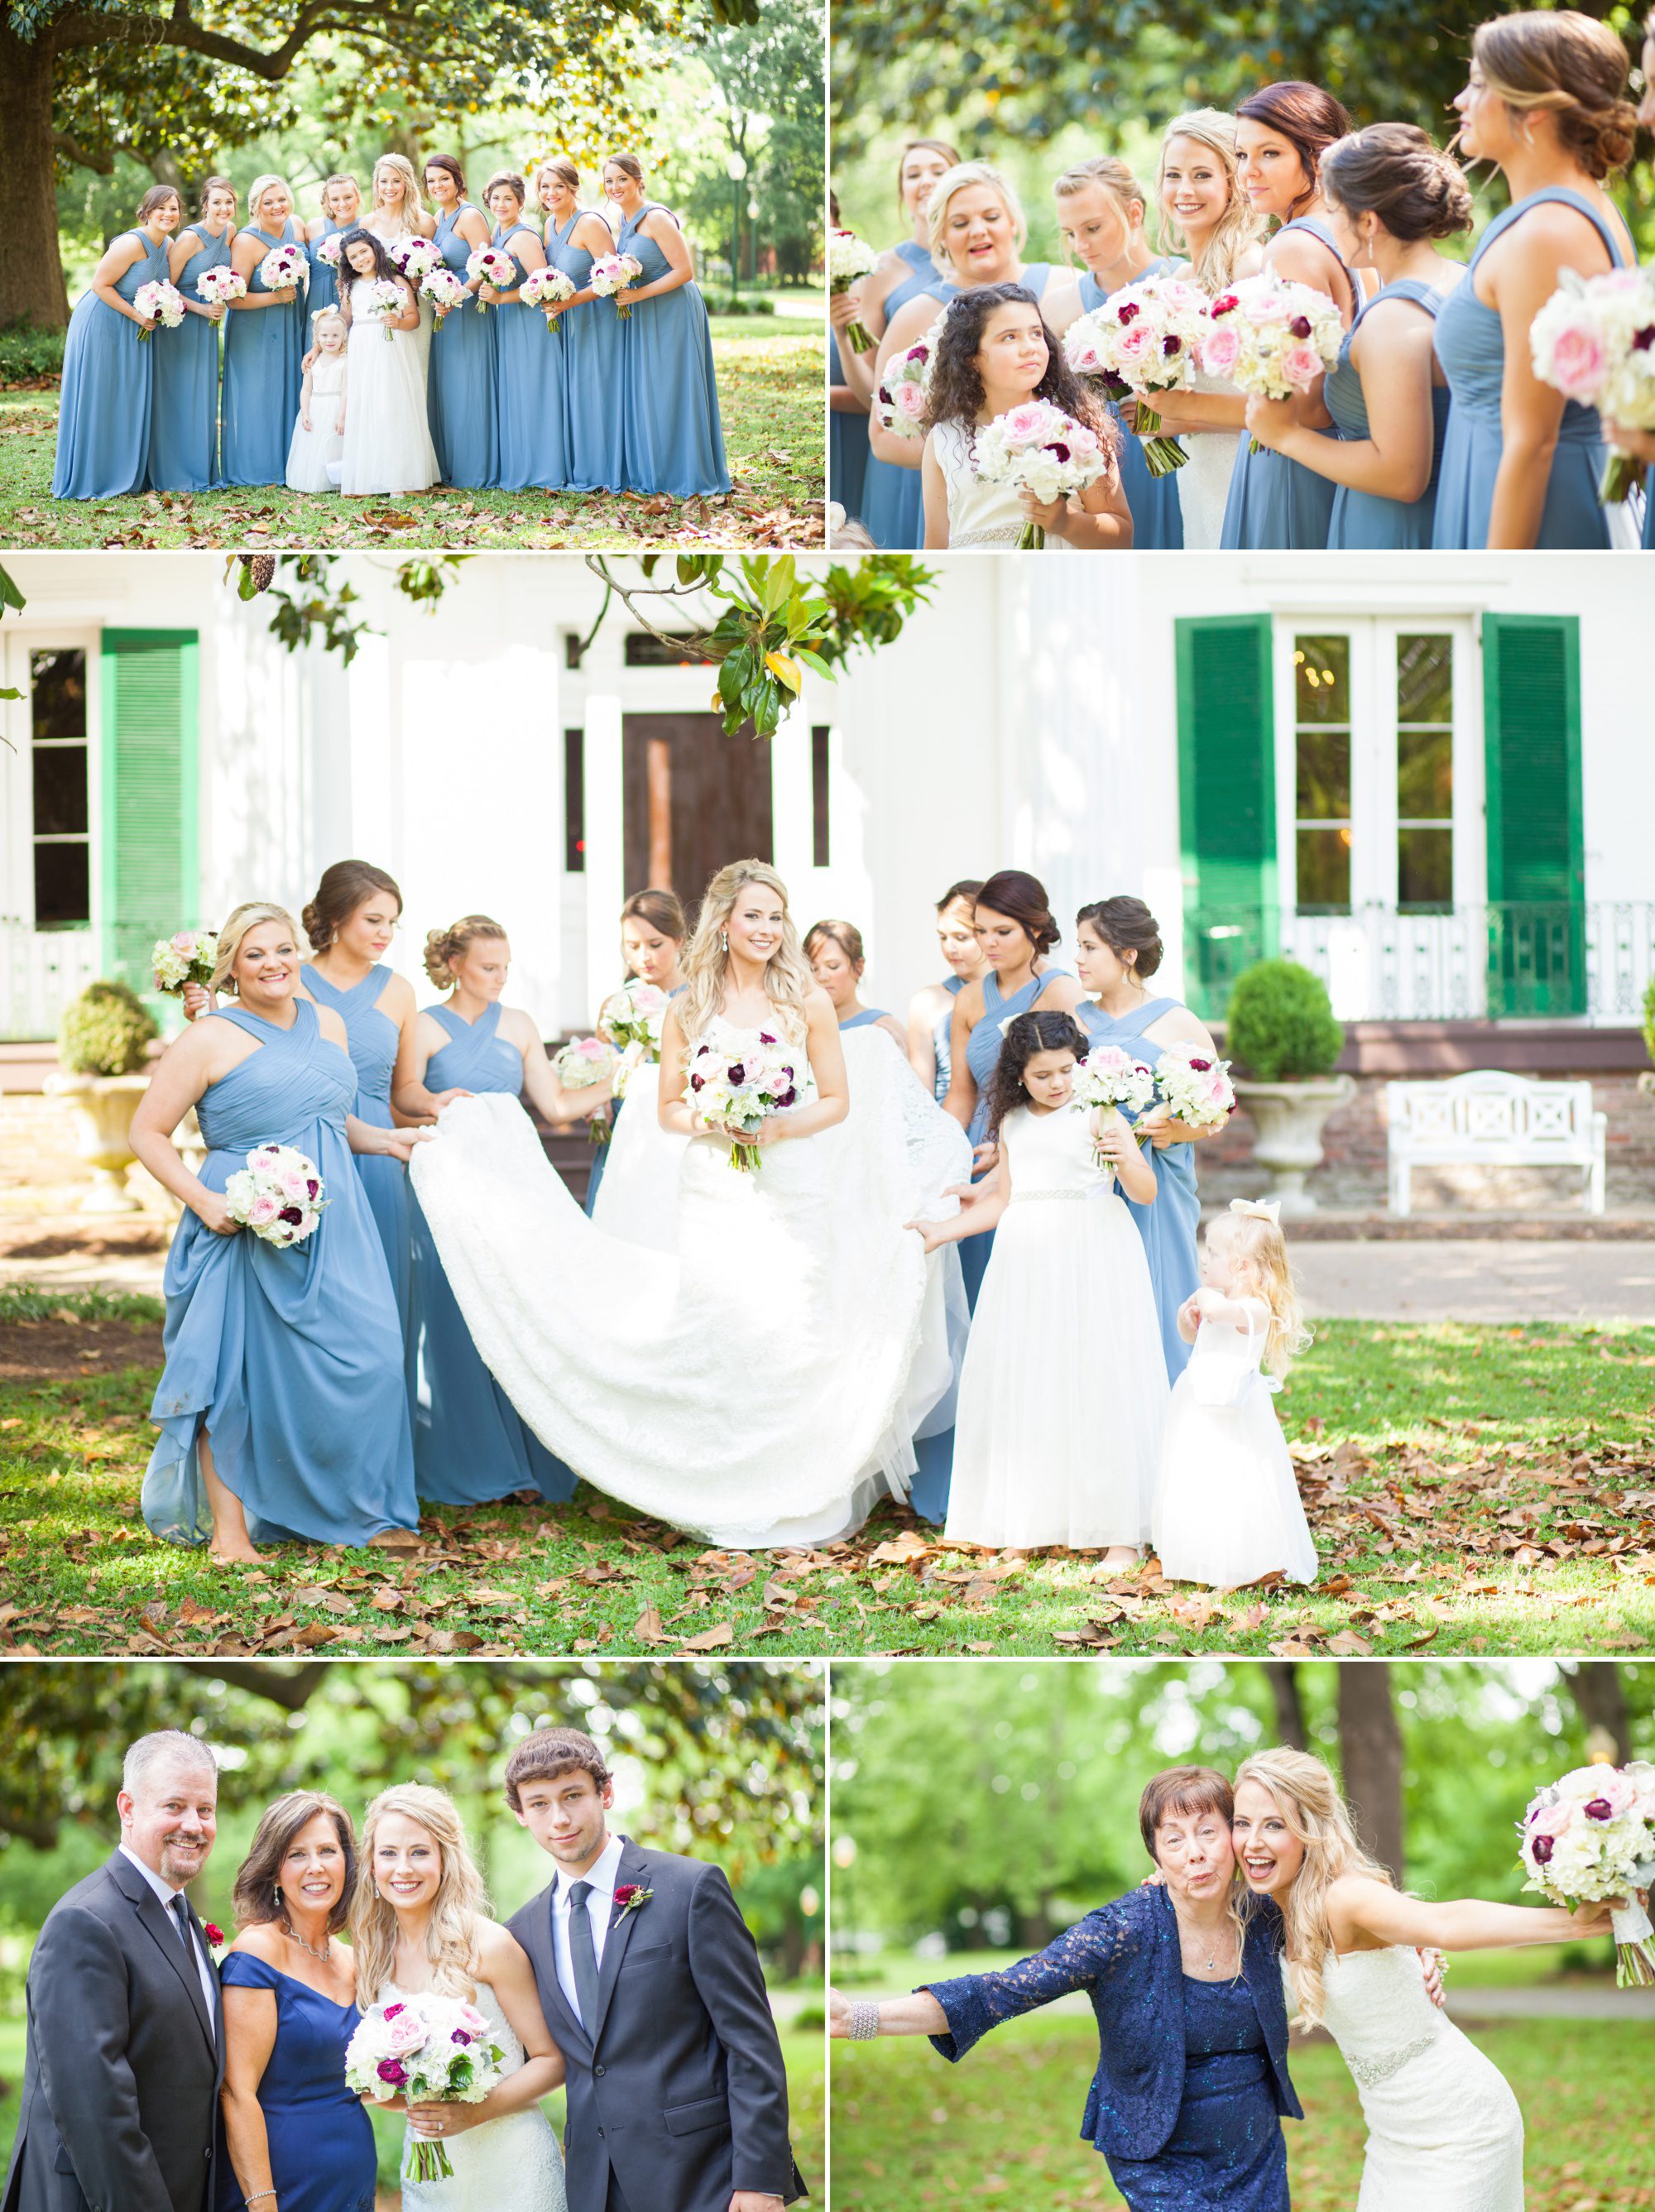 Bridesmaids and bride with family before wedding ceremony at Riverwood Mansion in Nashville, Tennessee. Photography by Krista Lee.